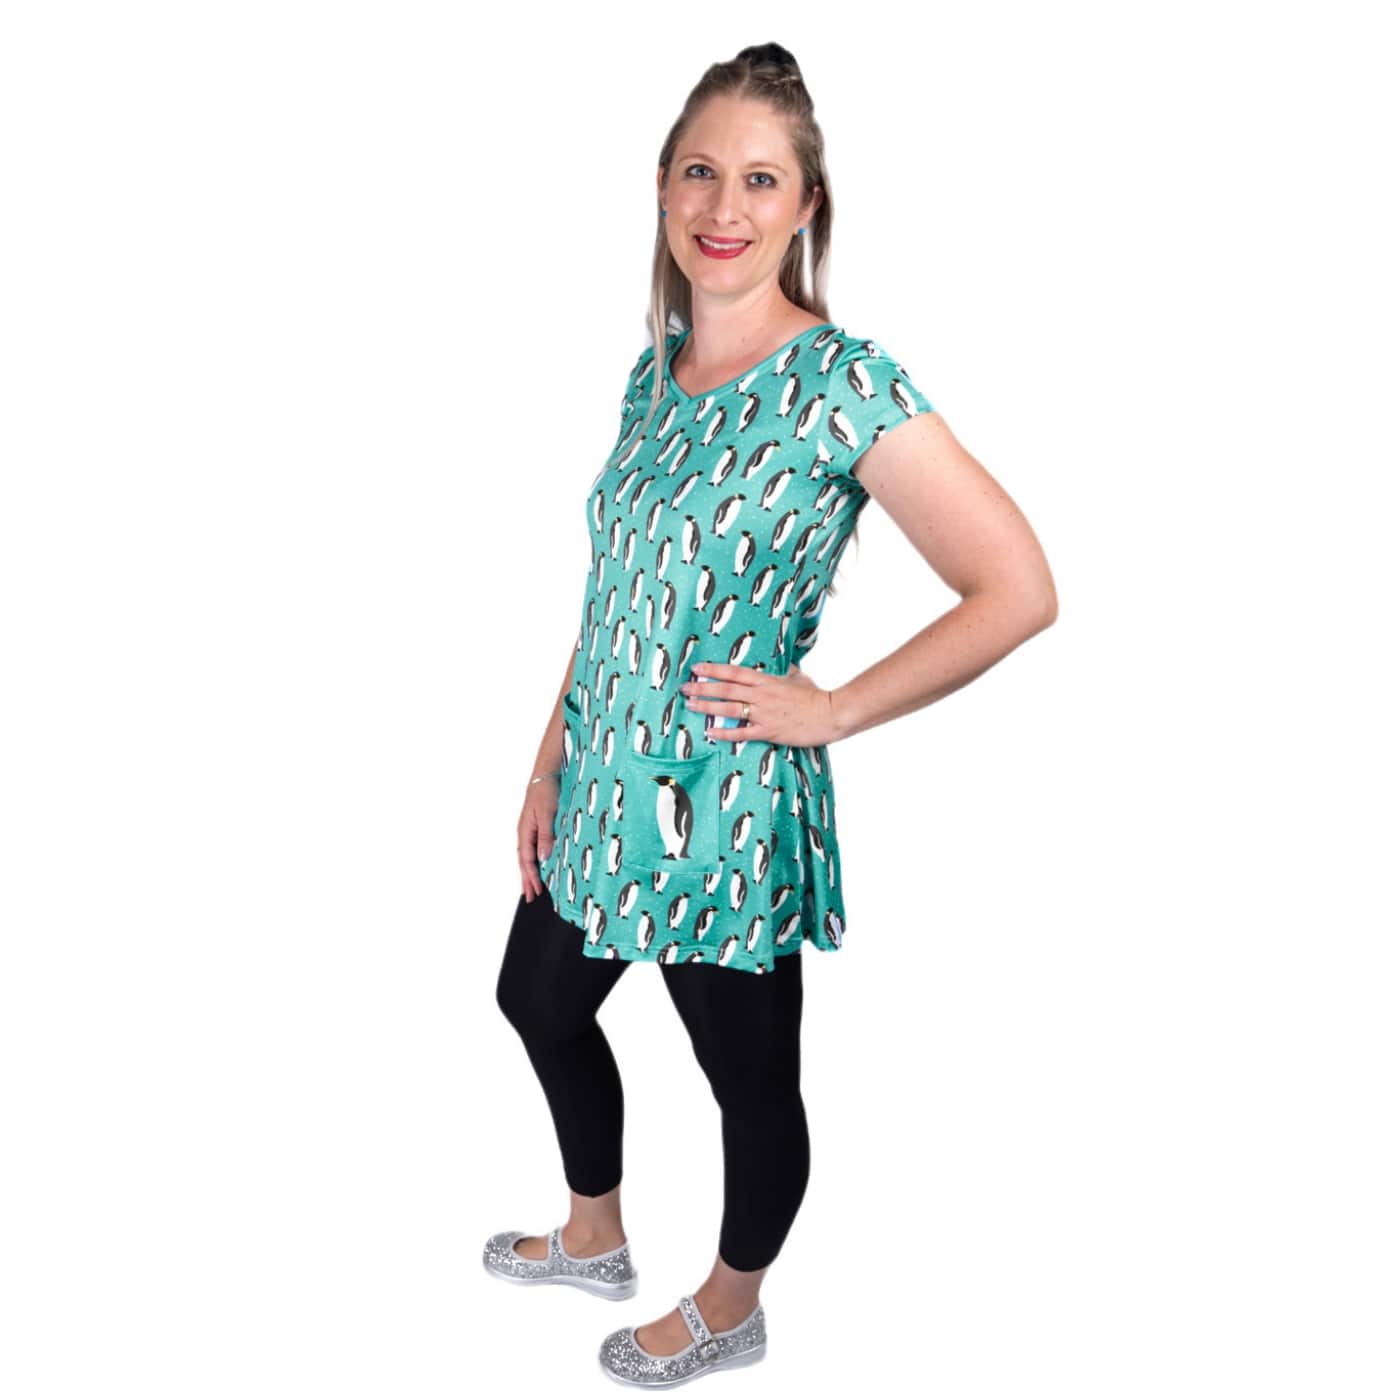 Waddle Tunic Top by RainbowsAndFairies.com.au (Emperor Penguin - Happy Feet - Penguins - Vintage Inspired - Kitsch - Top With Pockets) - SKU: CL_TUNIC_WADDL_ORG - Pic-03